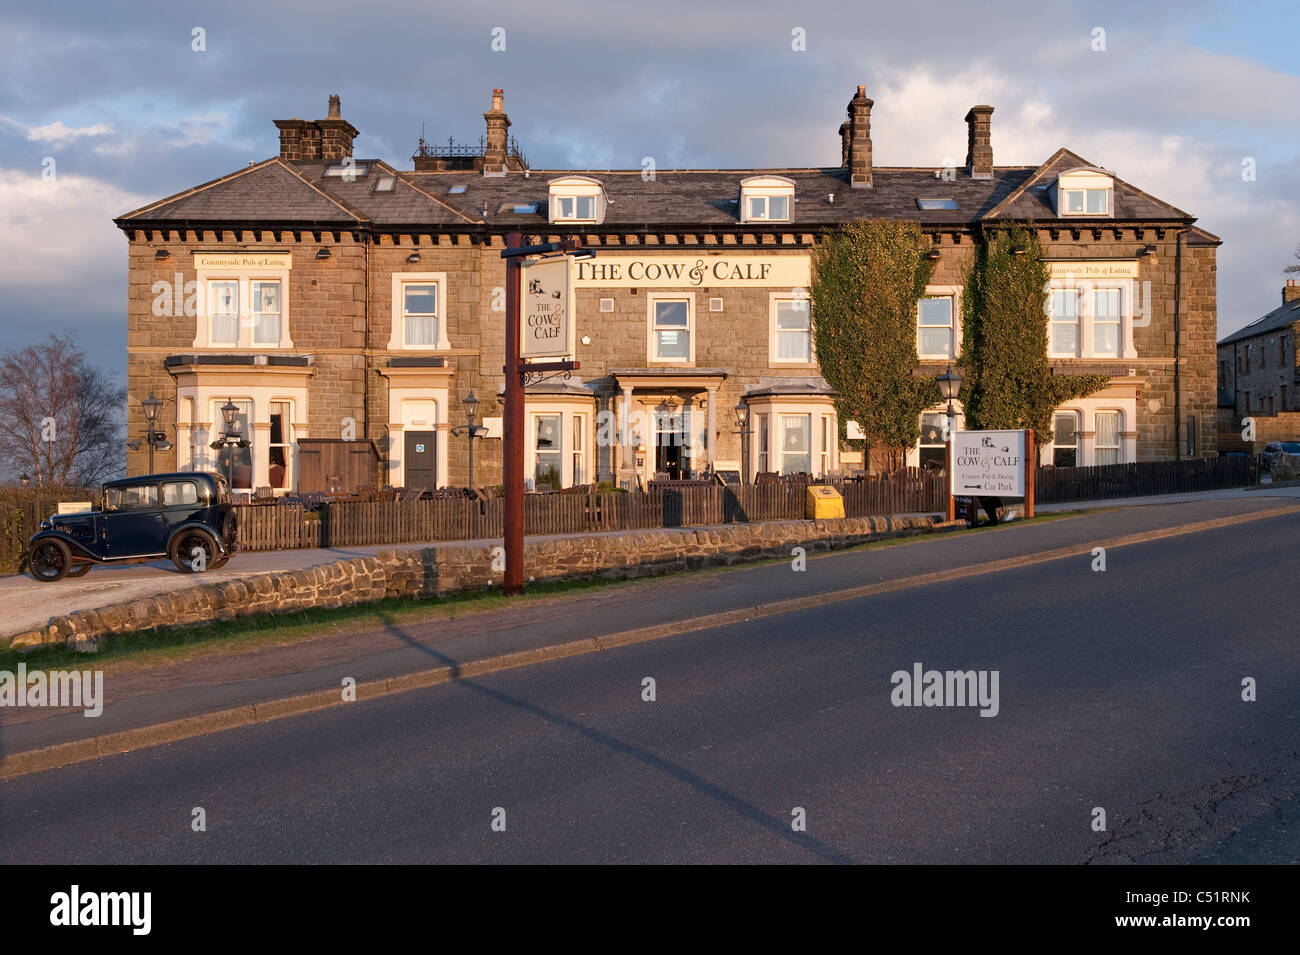 The Cow and Calf Hotel, traditional country pub restaurant (exterior) & classic car parked (Vintage Inns) - Ilkley Moor, West Yorkshire, England, UK. Stock Photo